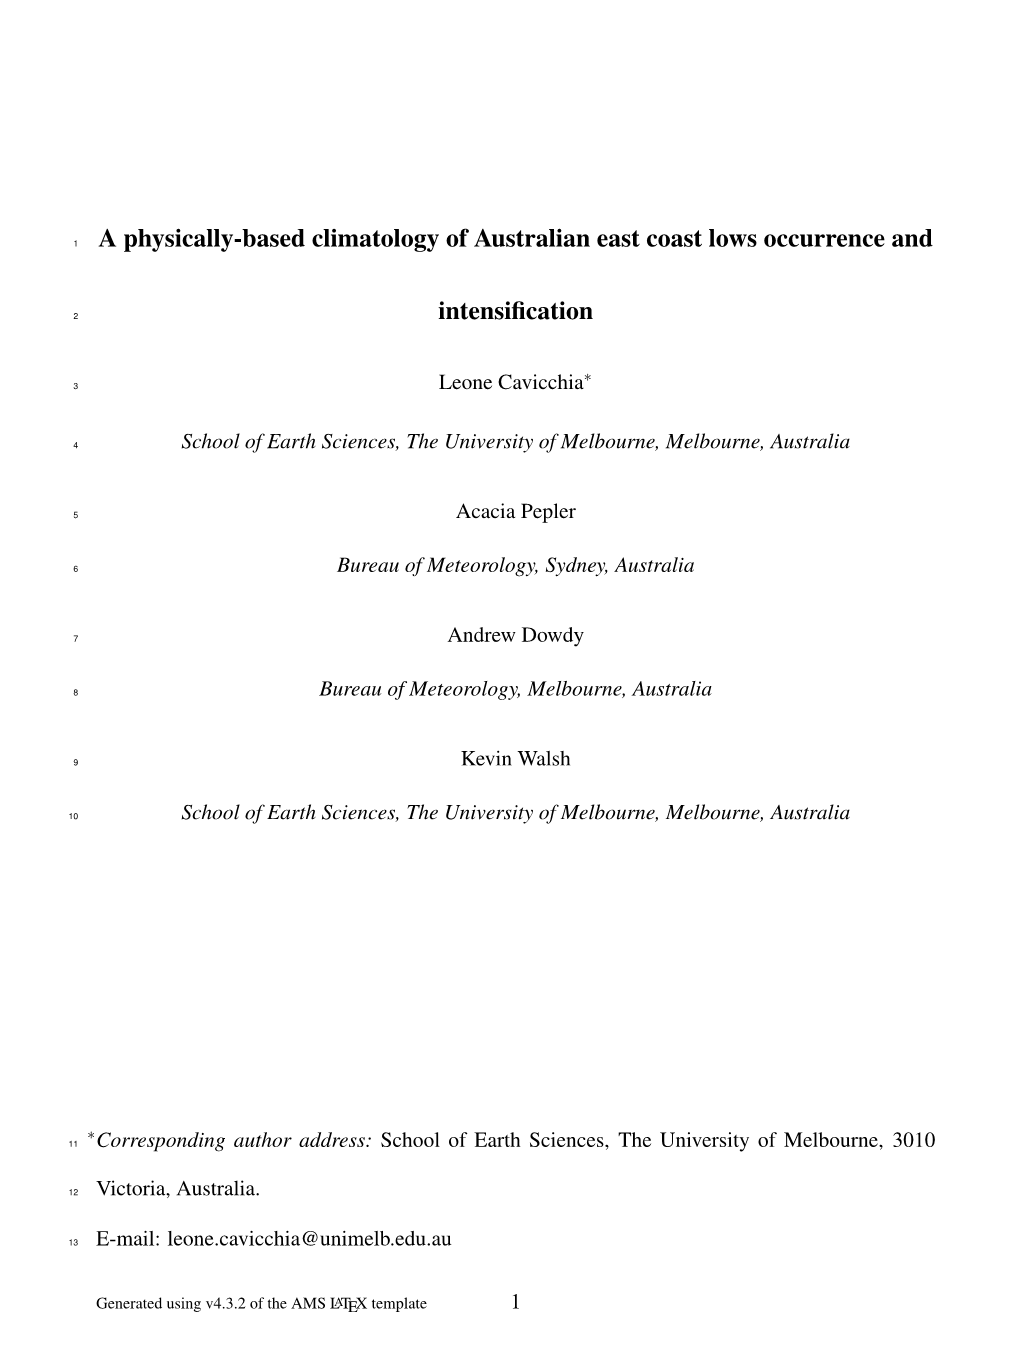 A Physically-Based Climatology of Australian East Coast Lows Occurrence And